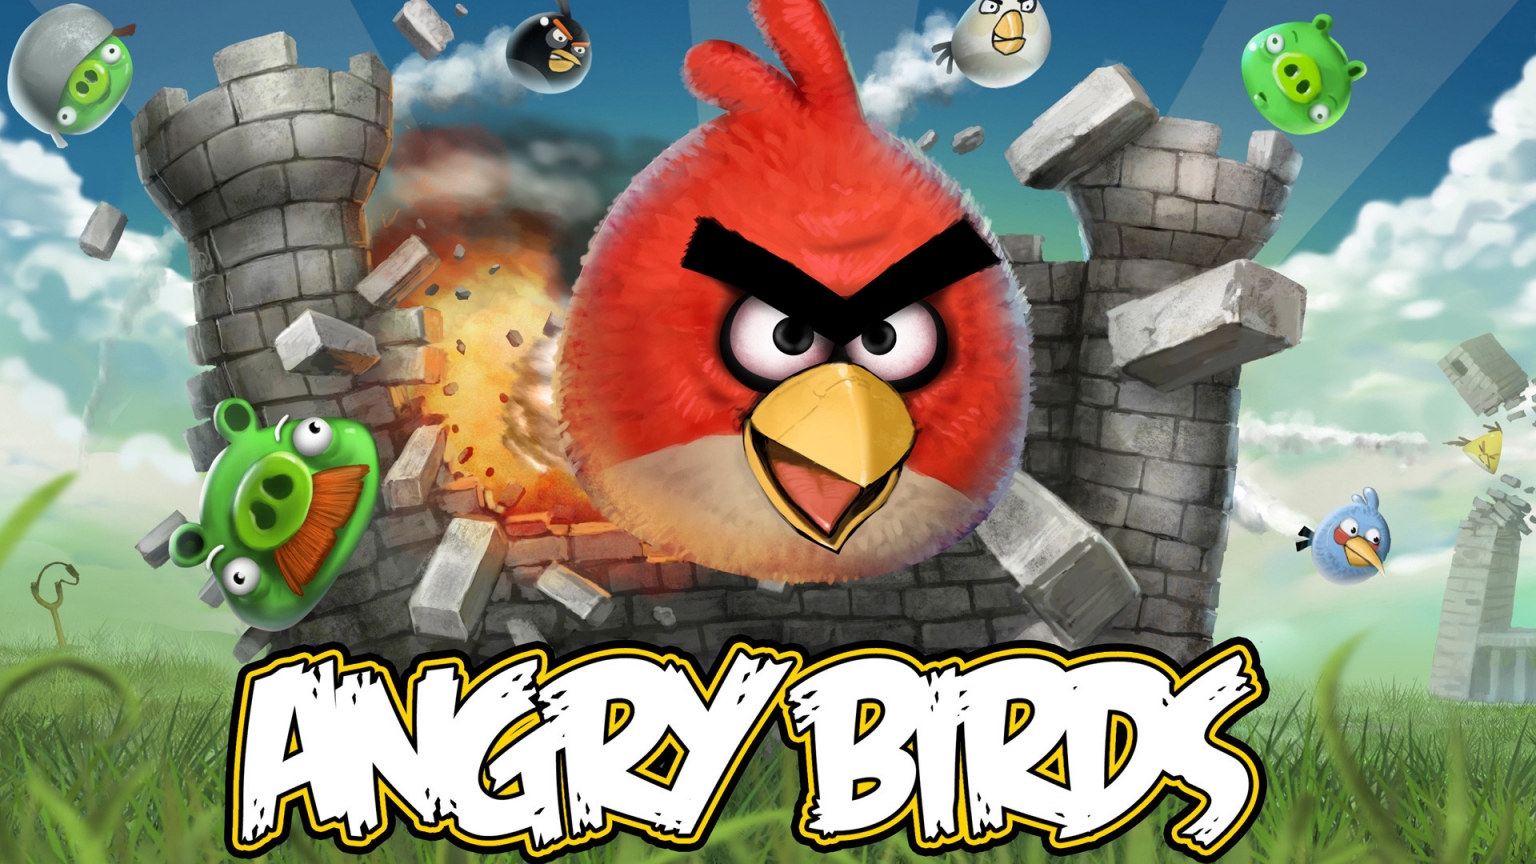 Angry Birds for 1536 x 864 HDTV resolution